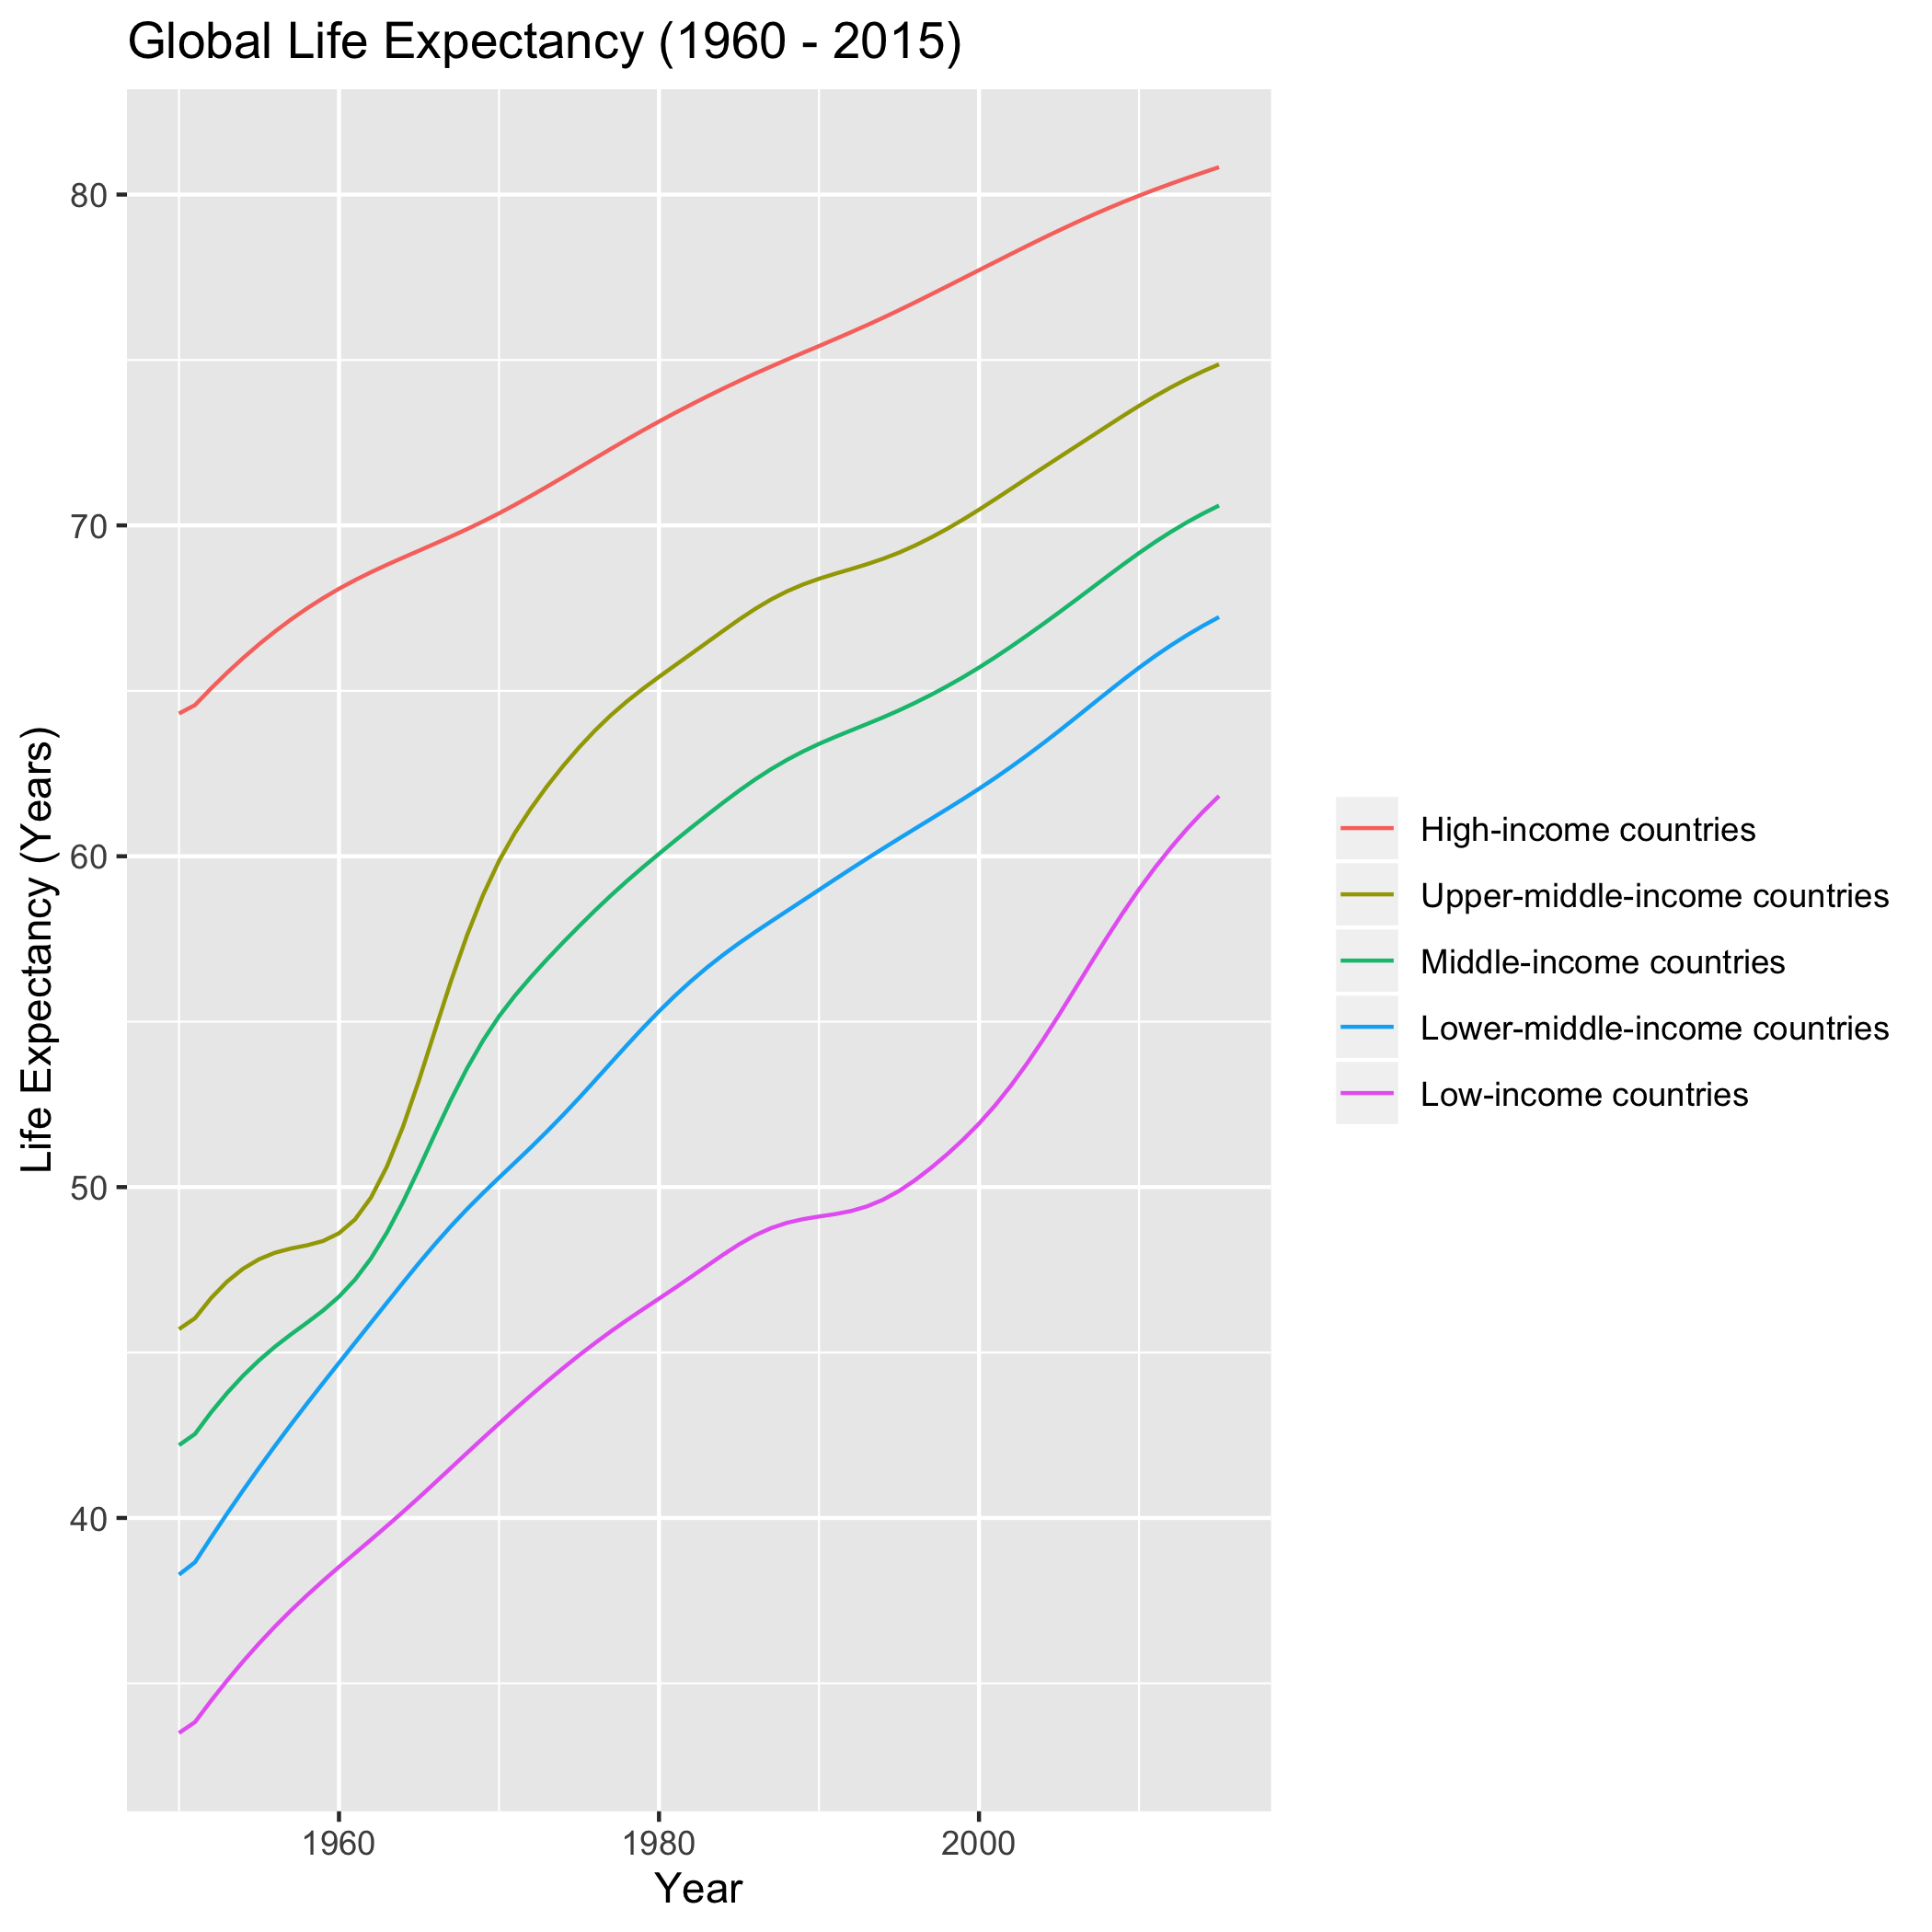 Global life expectancy for countries of different income levels